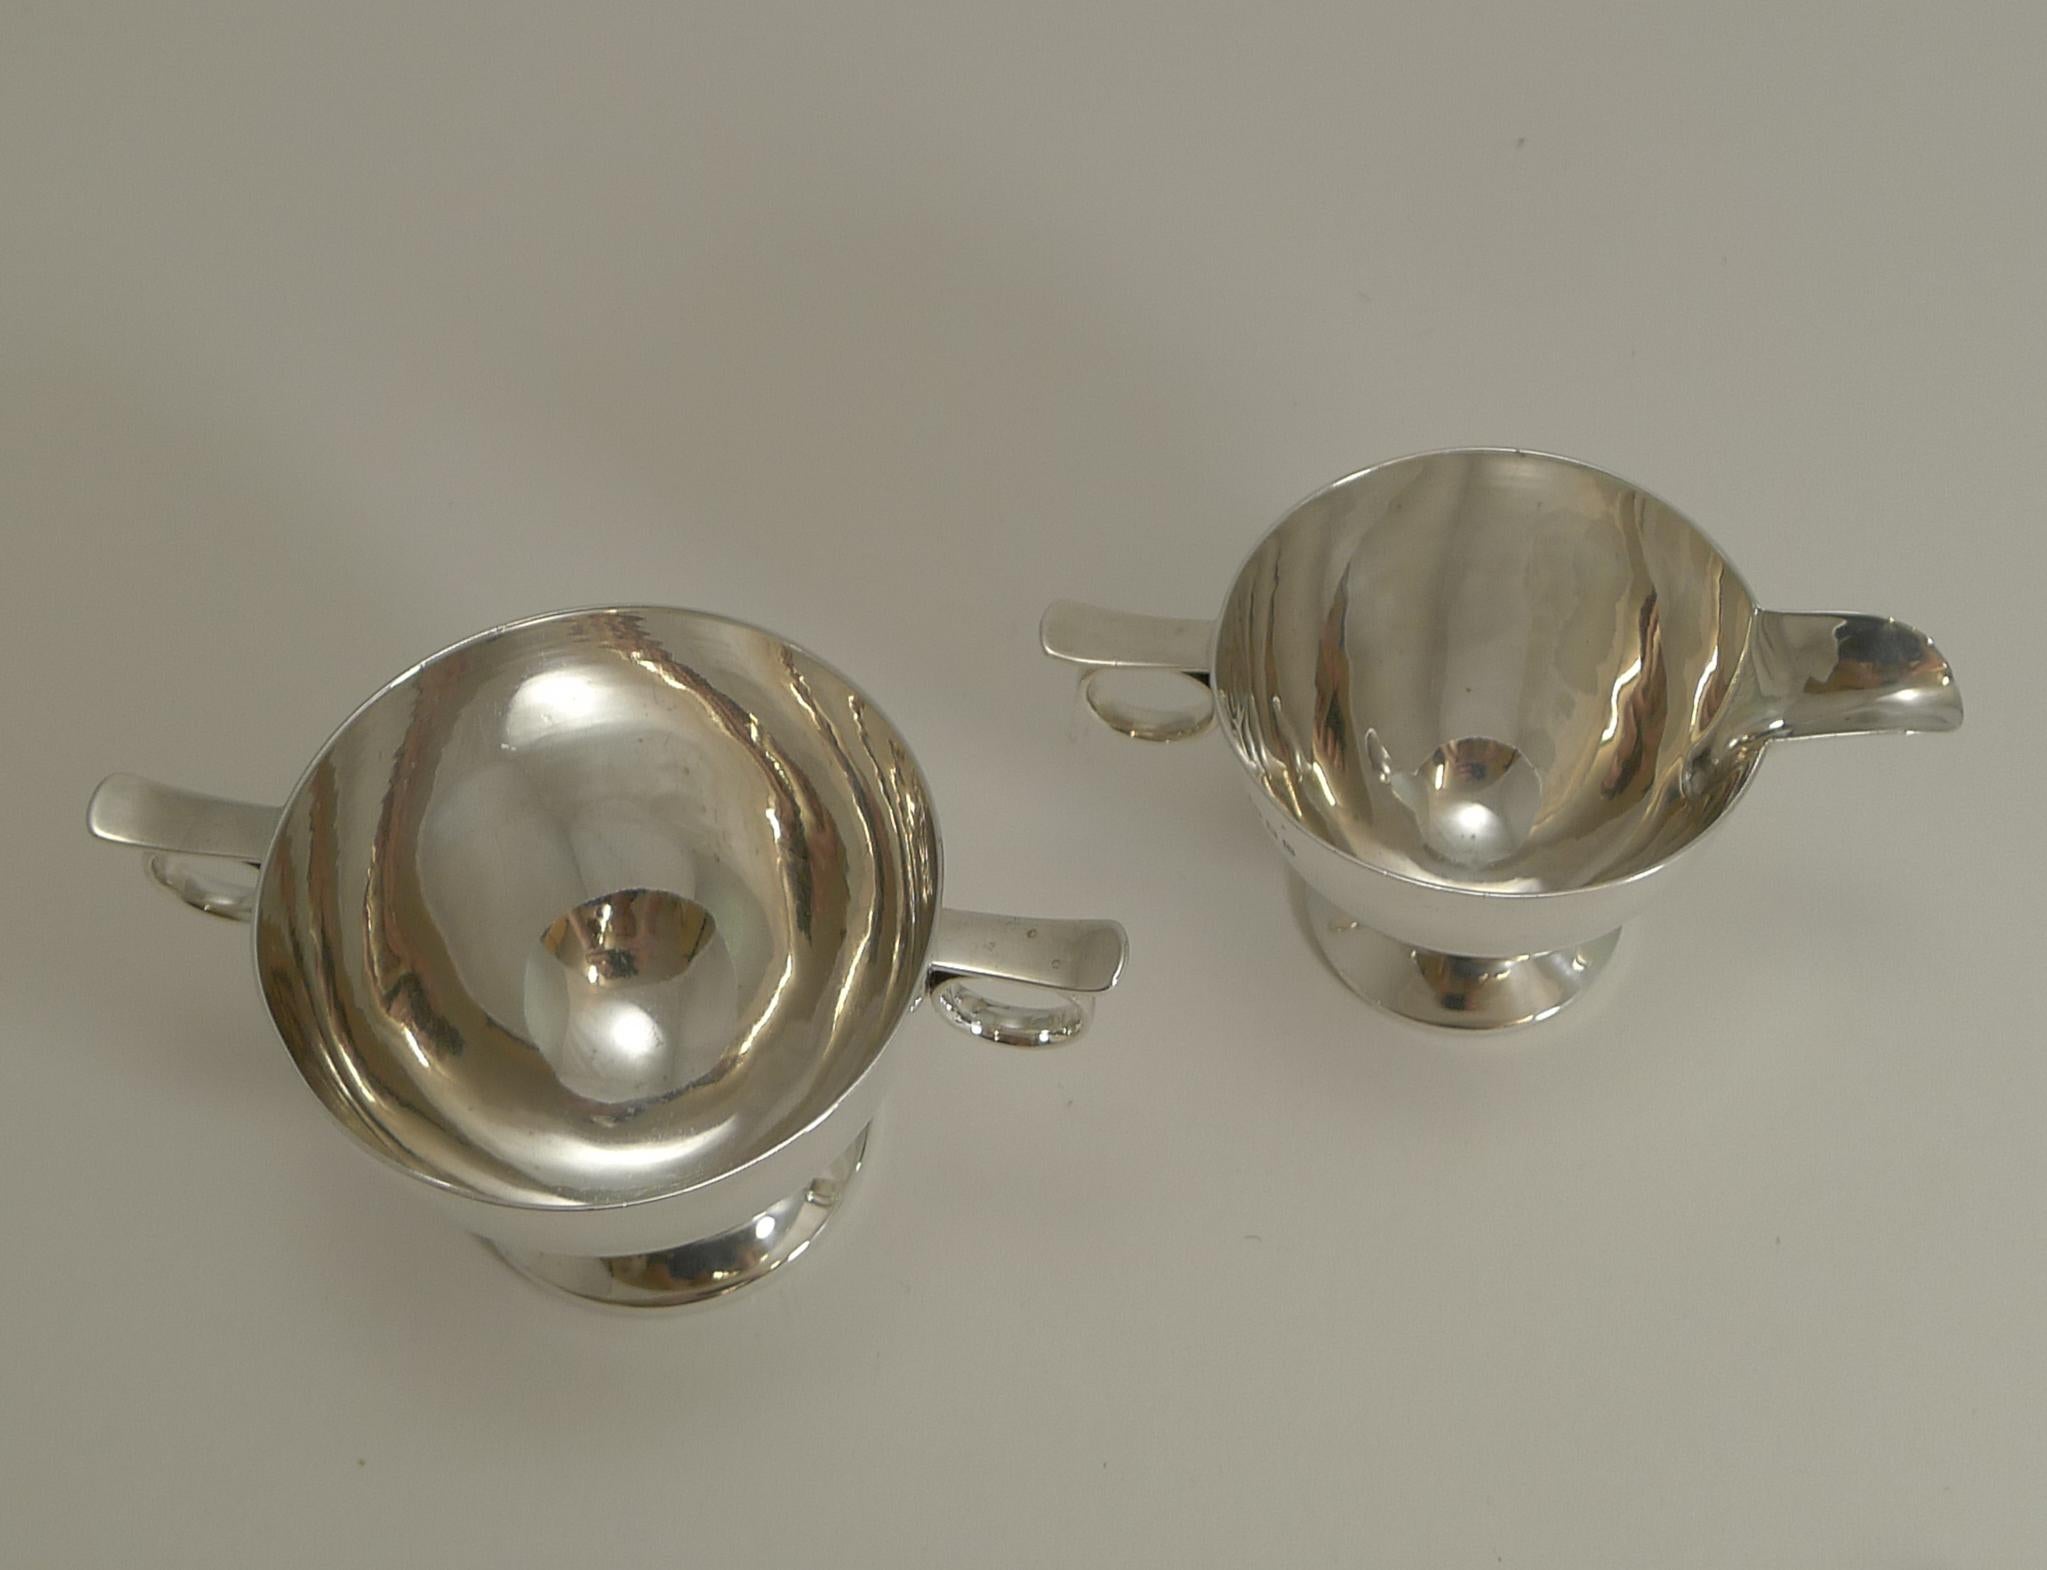 A fine quality and very stylish cream and sugar set made from a good heavy gauge of sterling silver with a very elegant Art Deco design.

Each piece is fully hallmarked for London 1935 together with the makers mark for Charles Boyton &